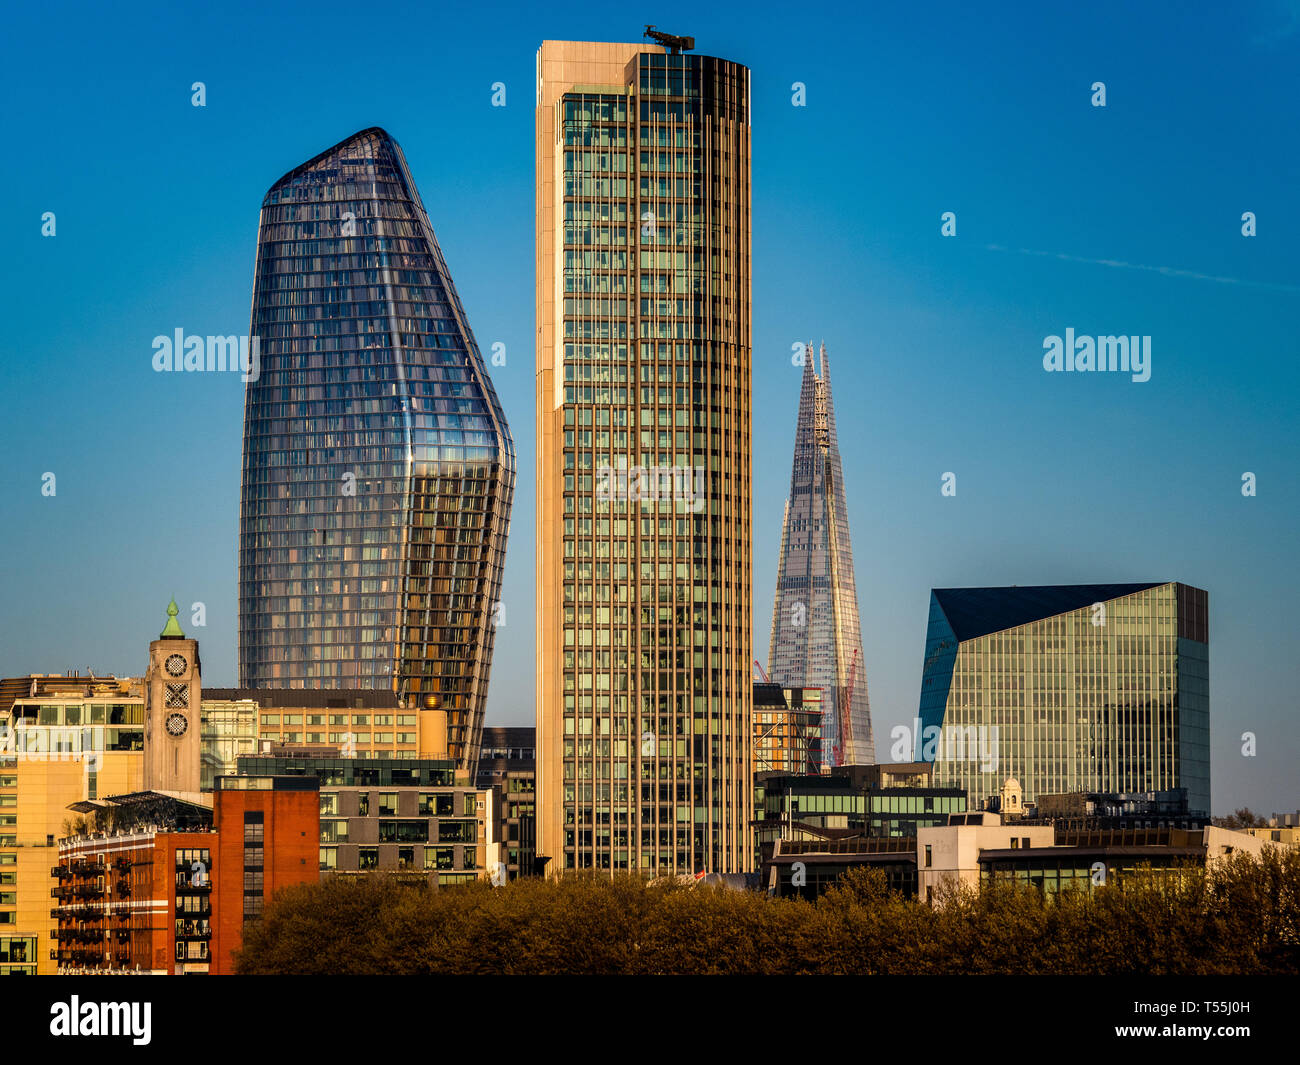 London Skyline South Bank including the Oxo Tower, the South Bank Tower, One Blackfriars and the Shard Stock Photo